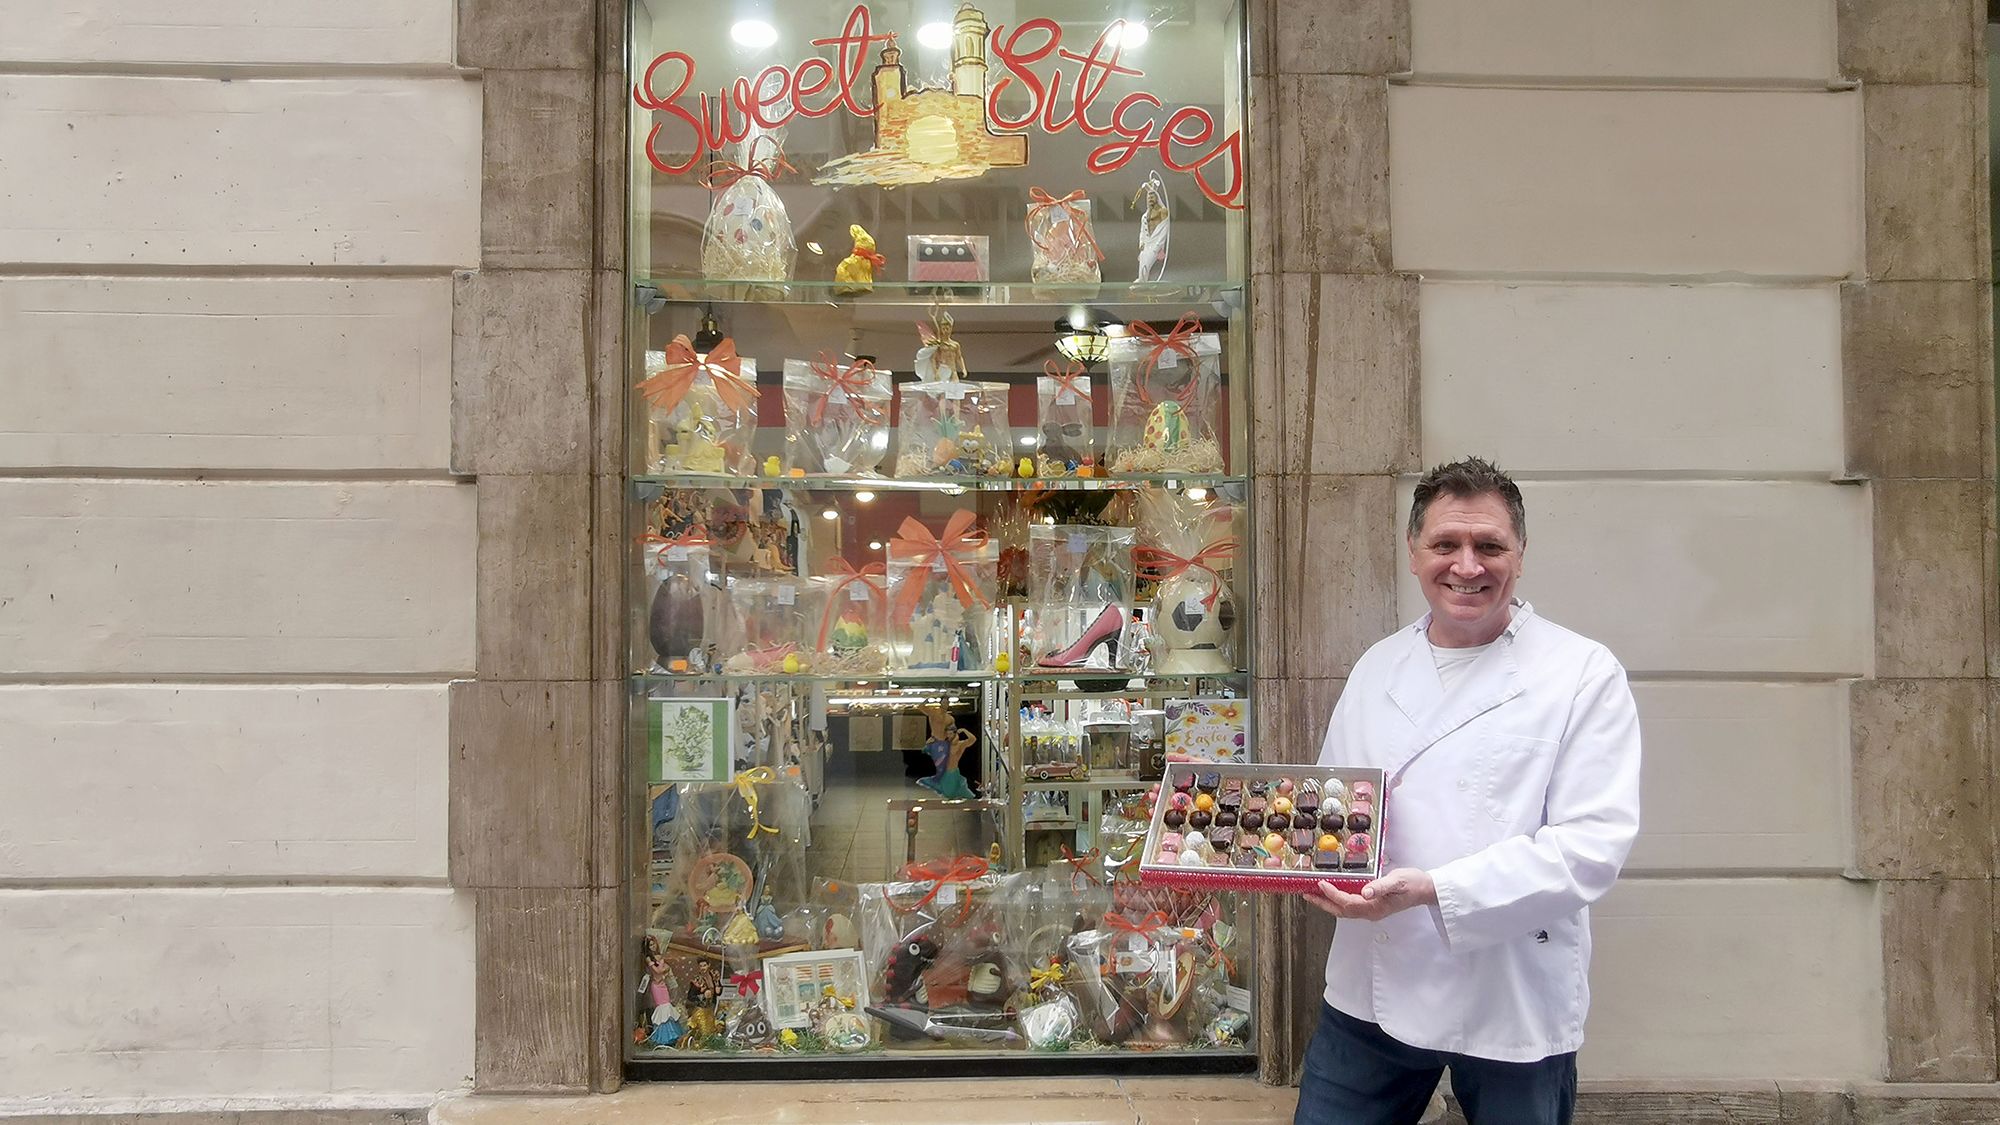 Robert Webber and his husband opened a chocolate shop in the Spanish town of Sitges.